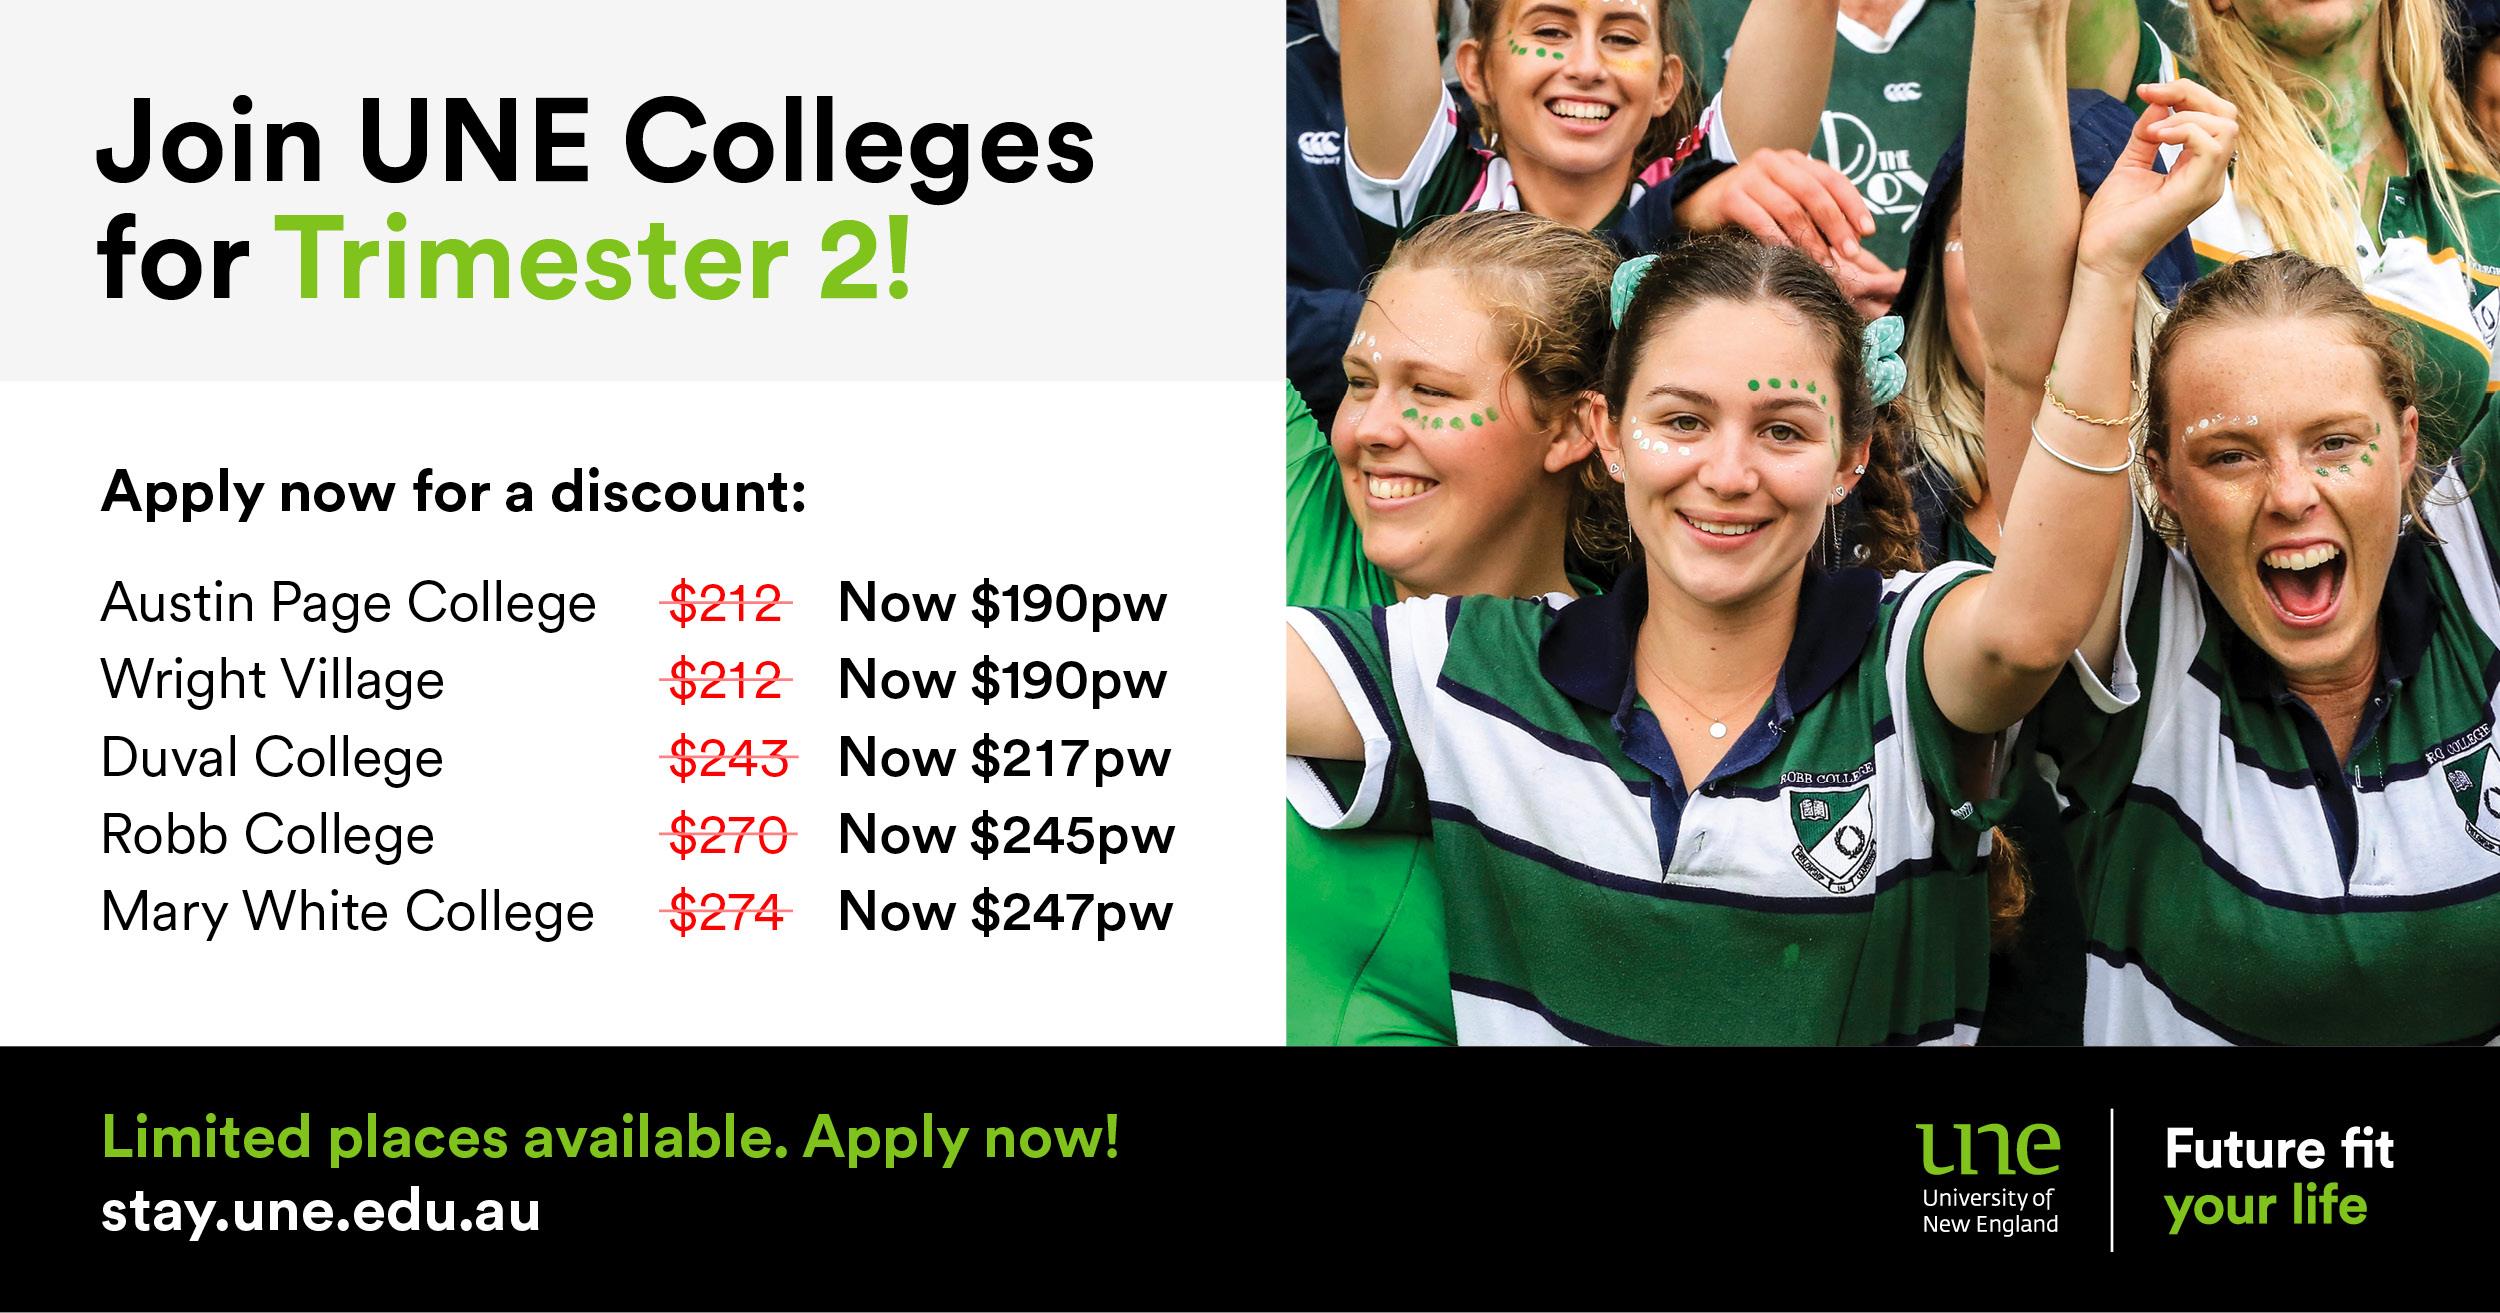 Apply Now fo Trimester 2 and receive a discount on your College fees!